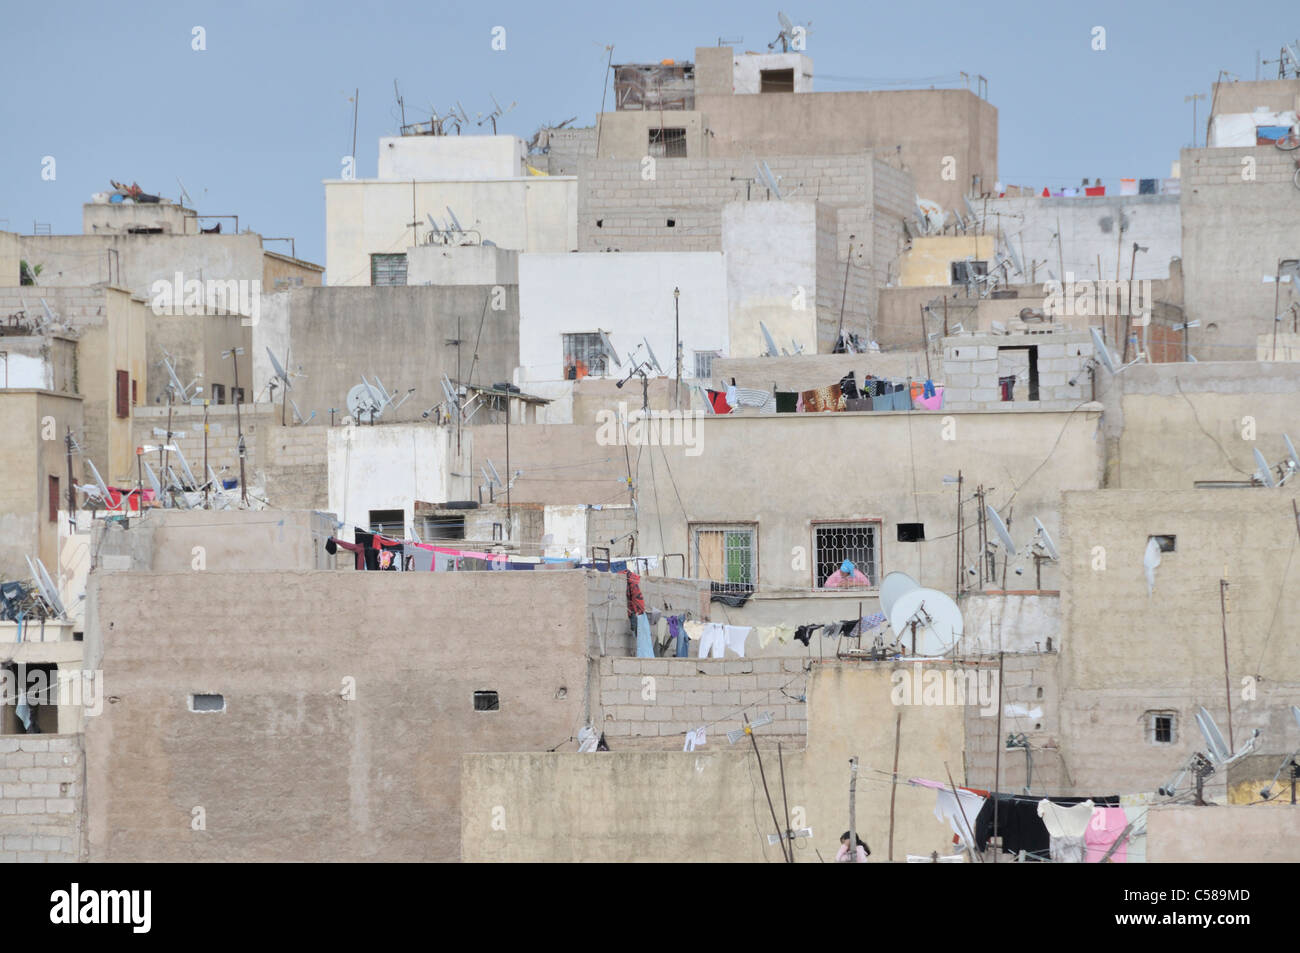 Africa, Morocco, Maghreb, North Africa, Fez, suburb, housing development, wall, architecture Stock Photo